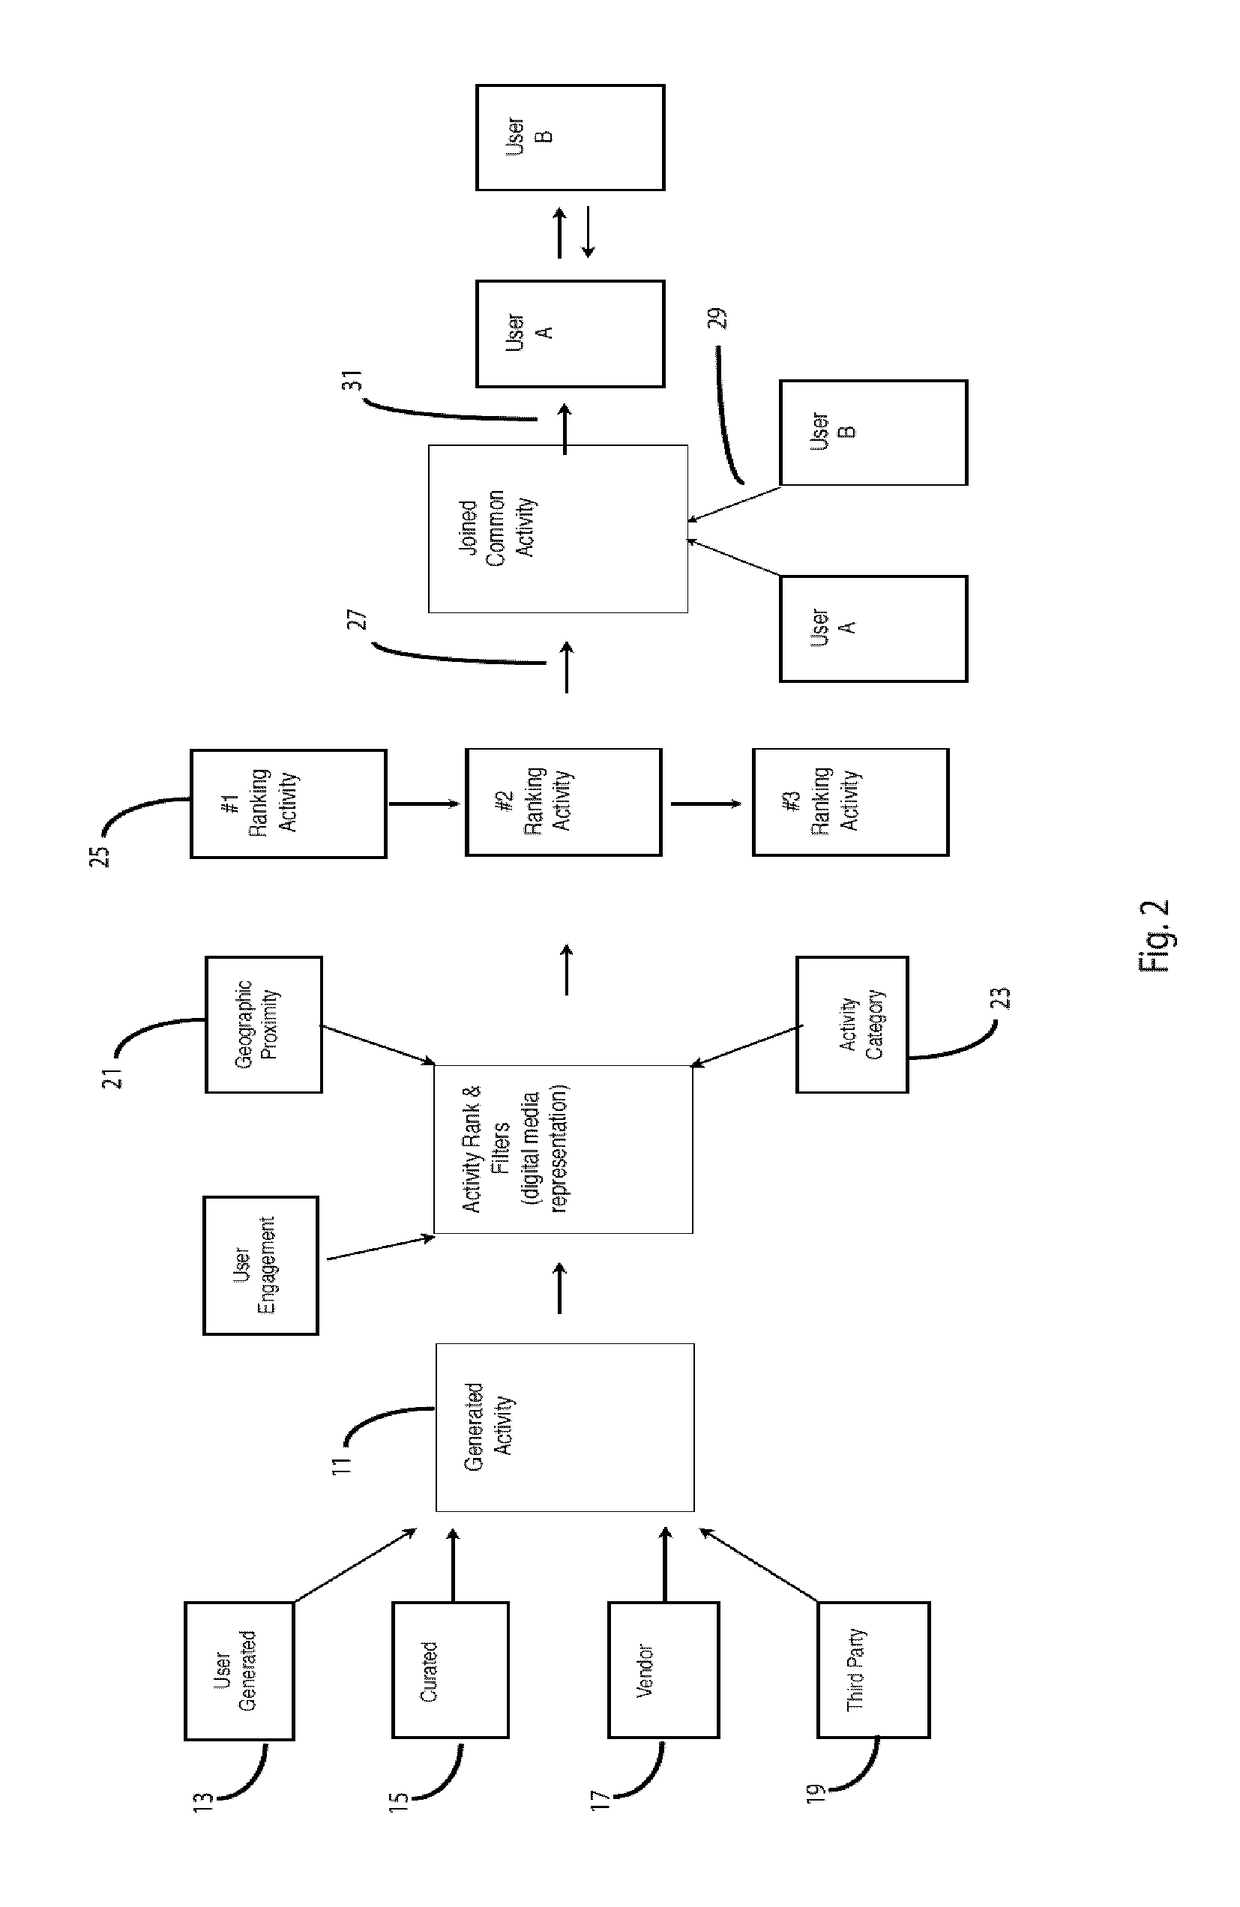 An Activity-Centric System And Method For Relationship Matching